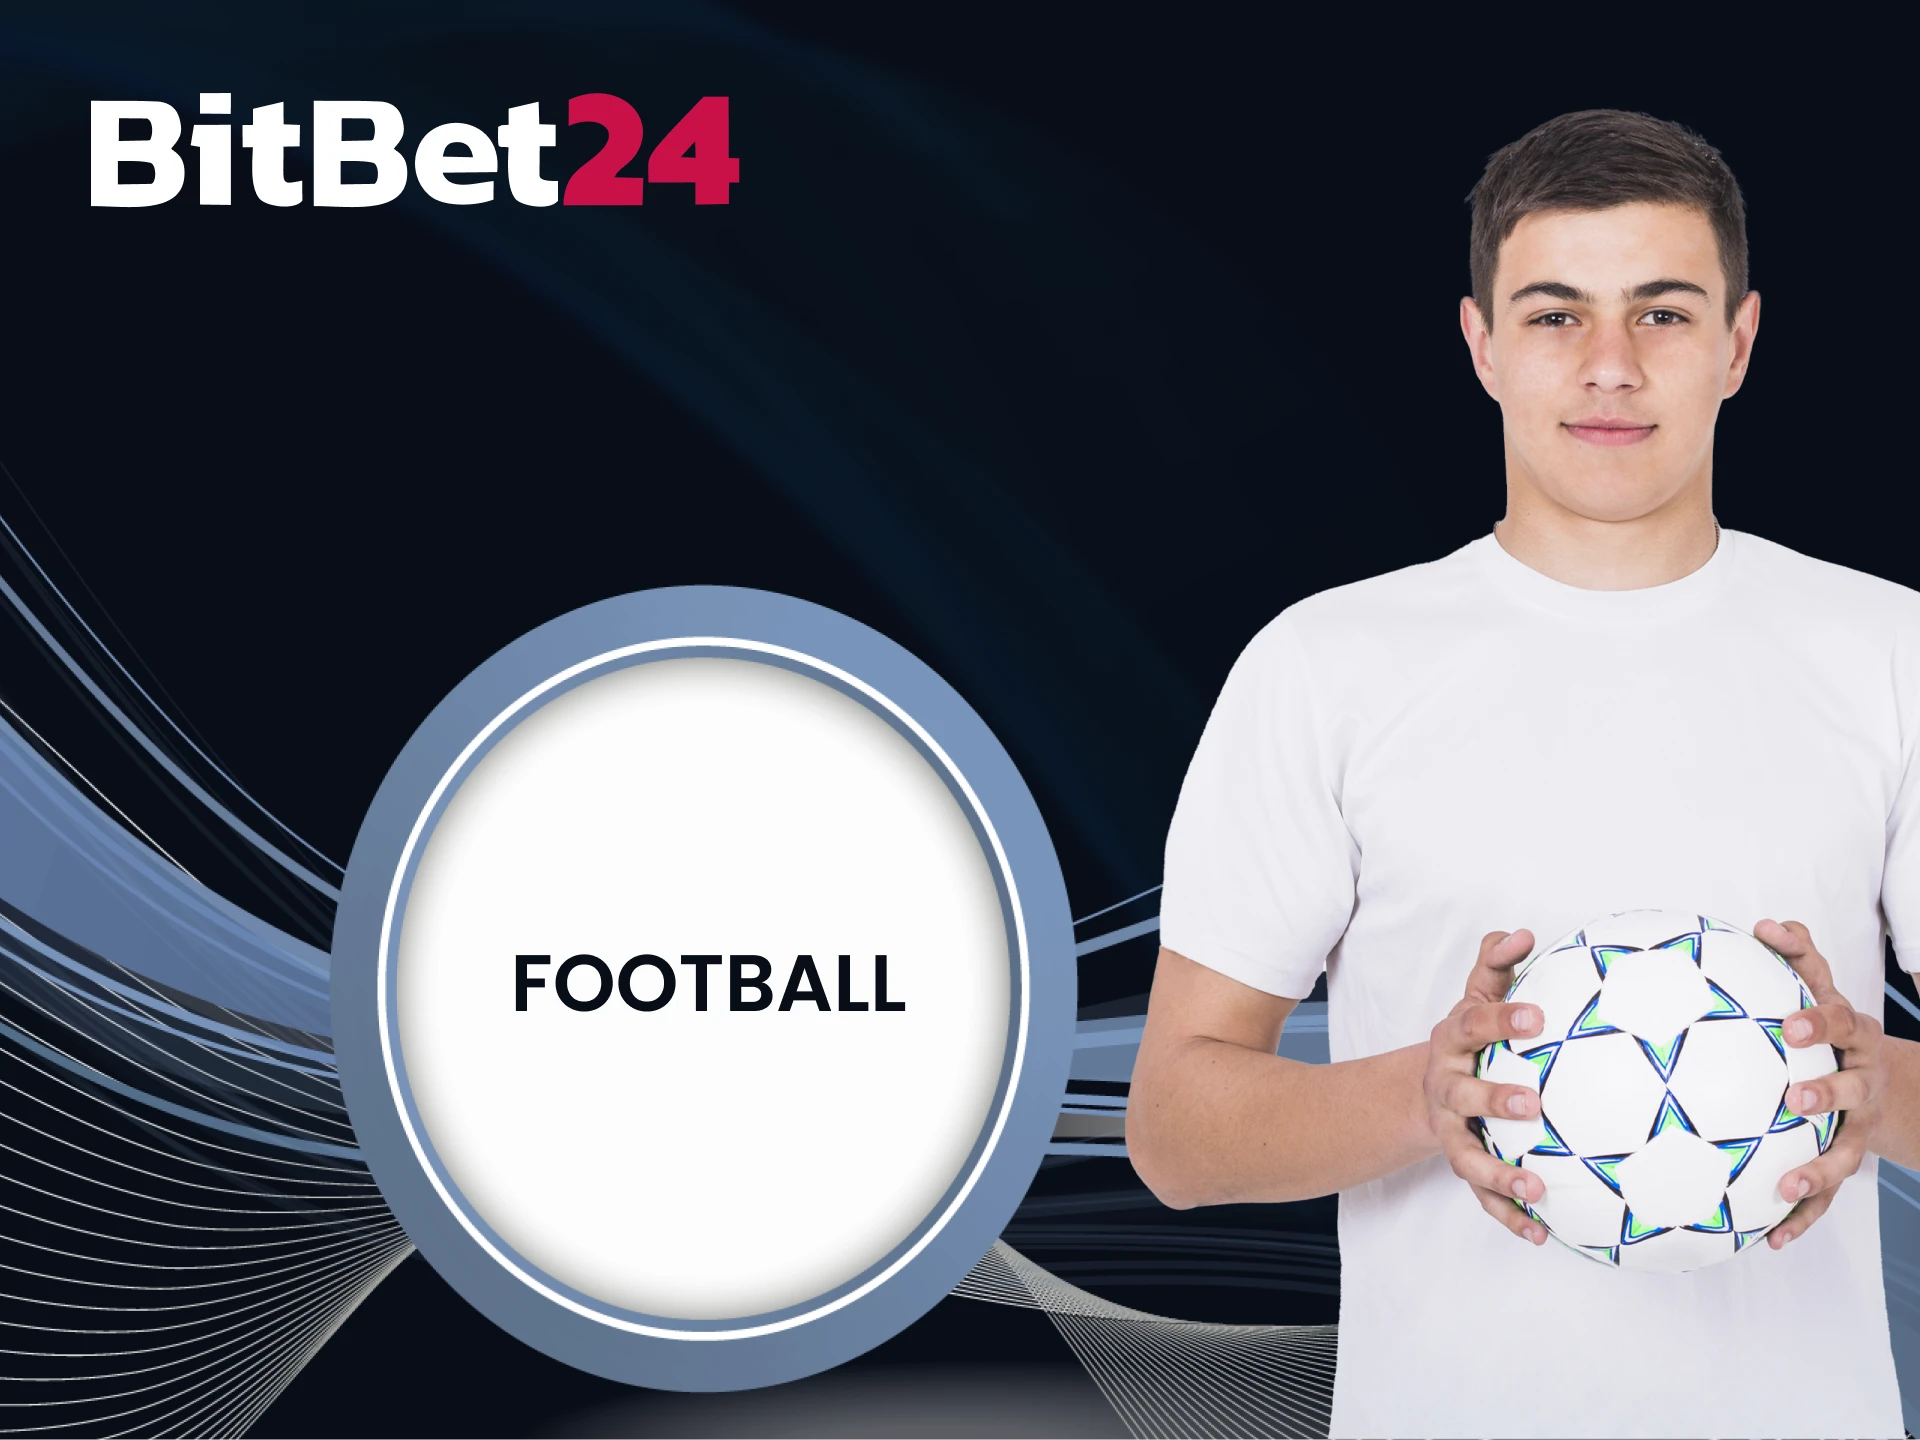 Bet on football with BitBet24.